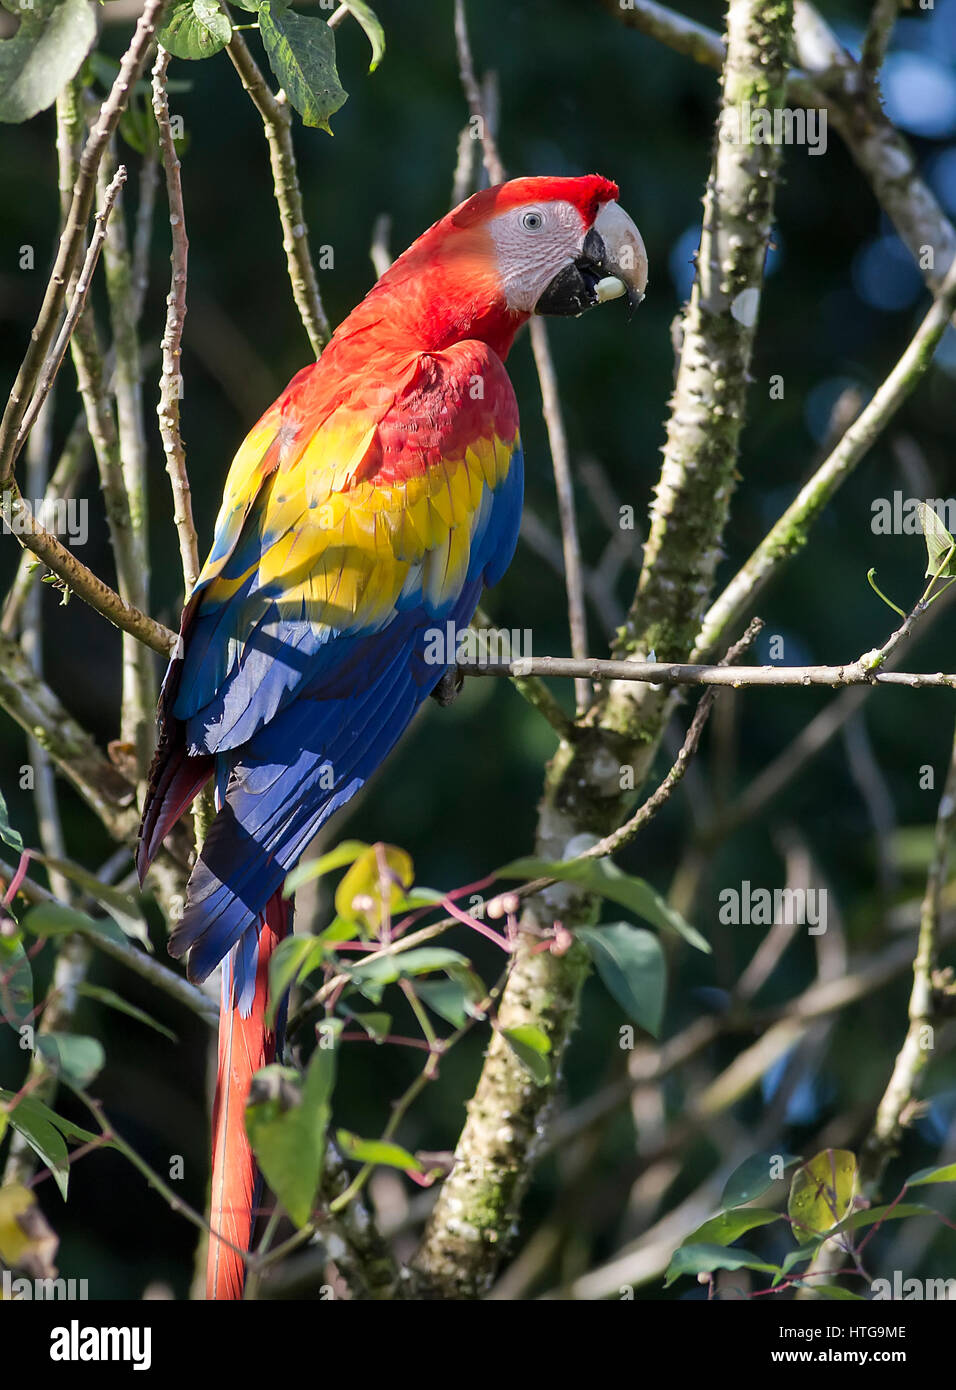 Scarlet Macaw perched on a branch eating fruit Stock Photo